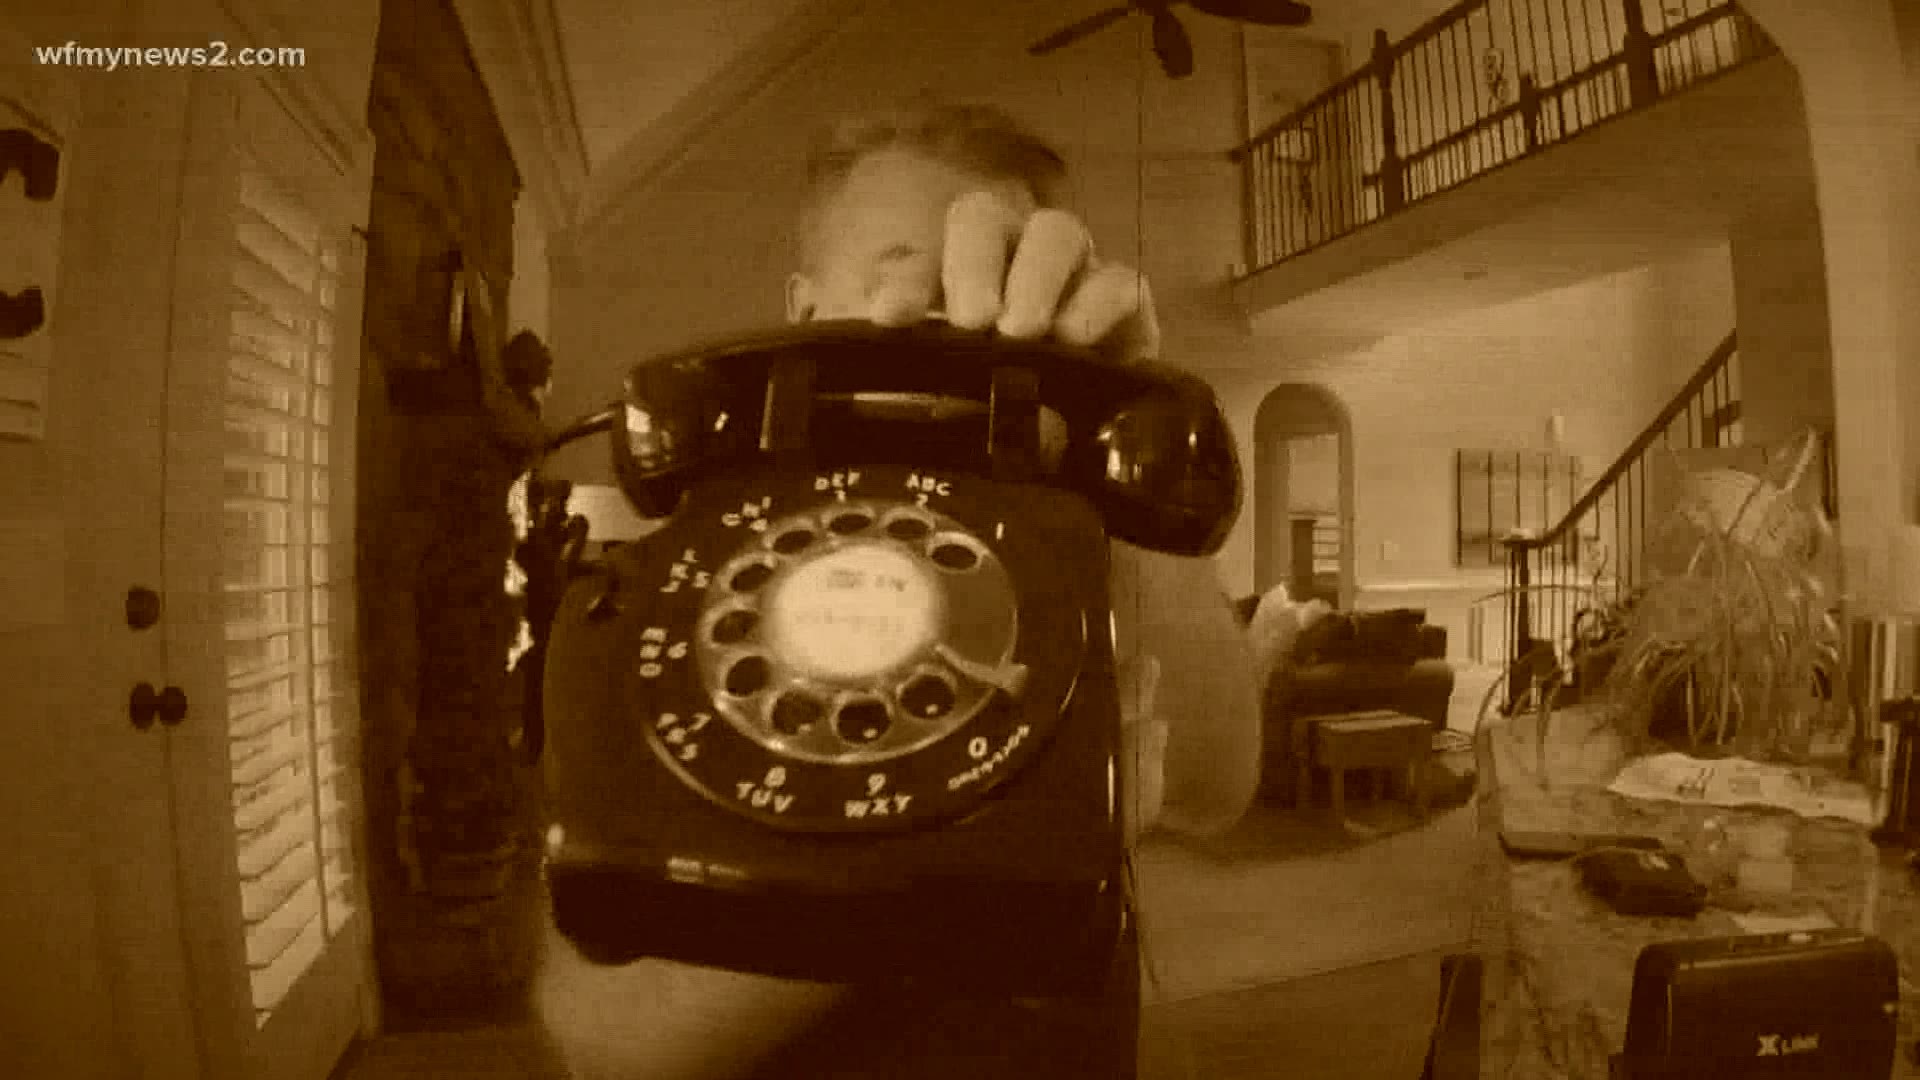 Eric Chilton managed to get an old rotary phone to work through his smartphone. He shares a tutorial on how he did it.